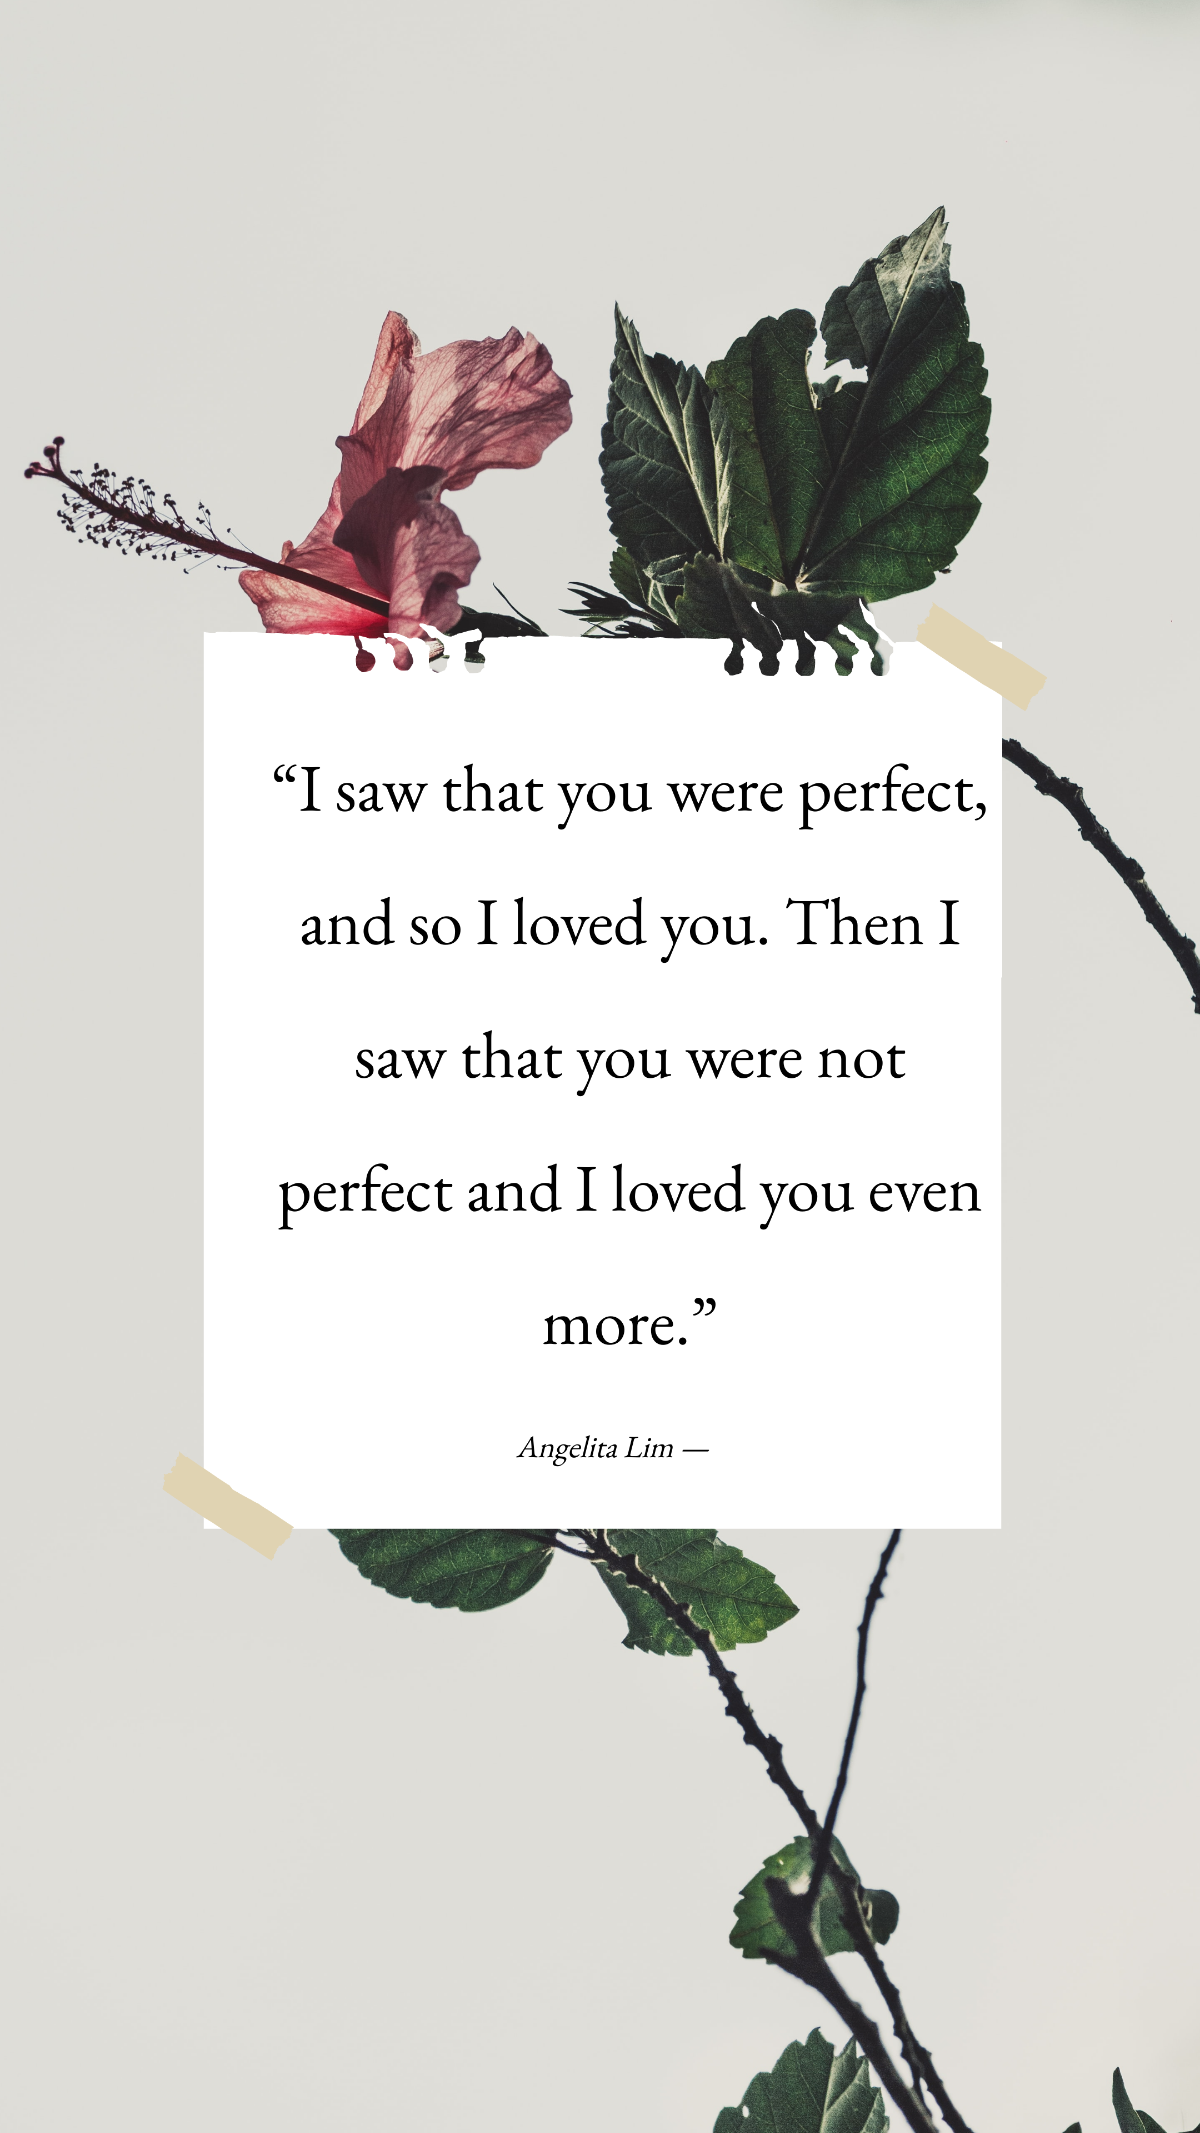 Angelita Lim — “I saw that you were perfect, and so I loved you. Then I saw that you were not perfect and I loved you even more.” Template